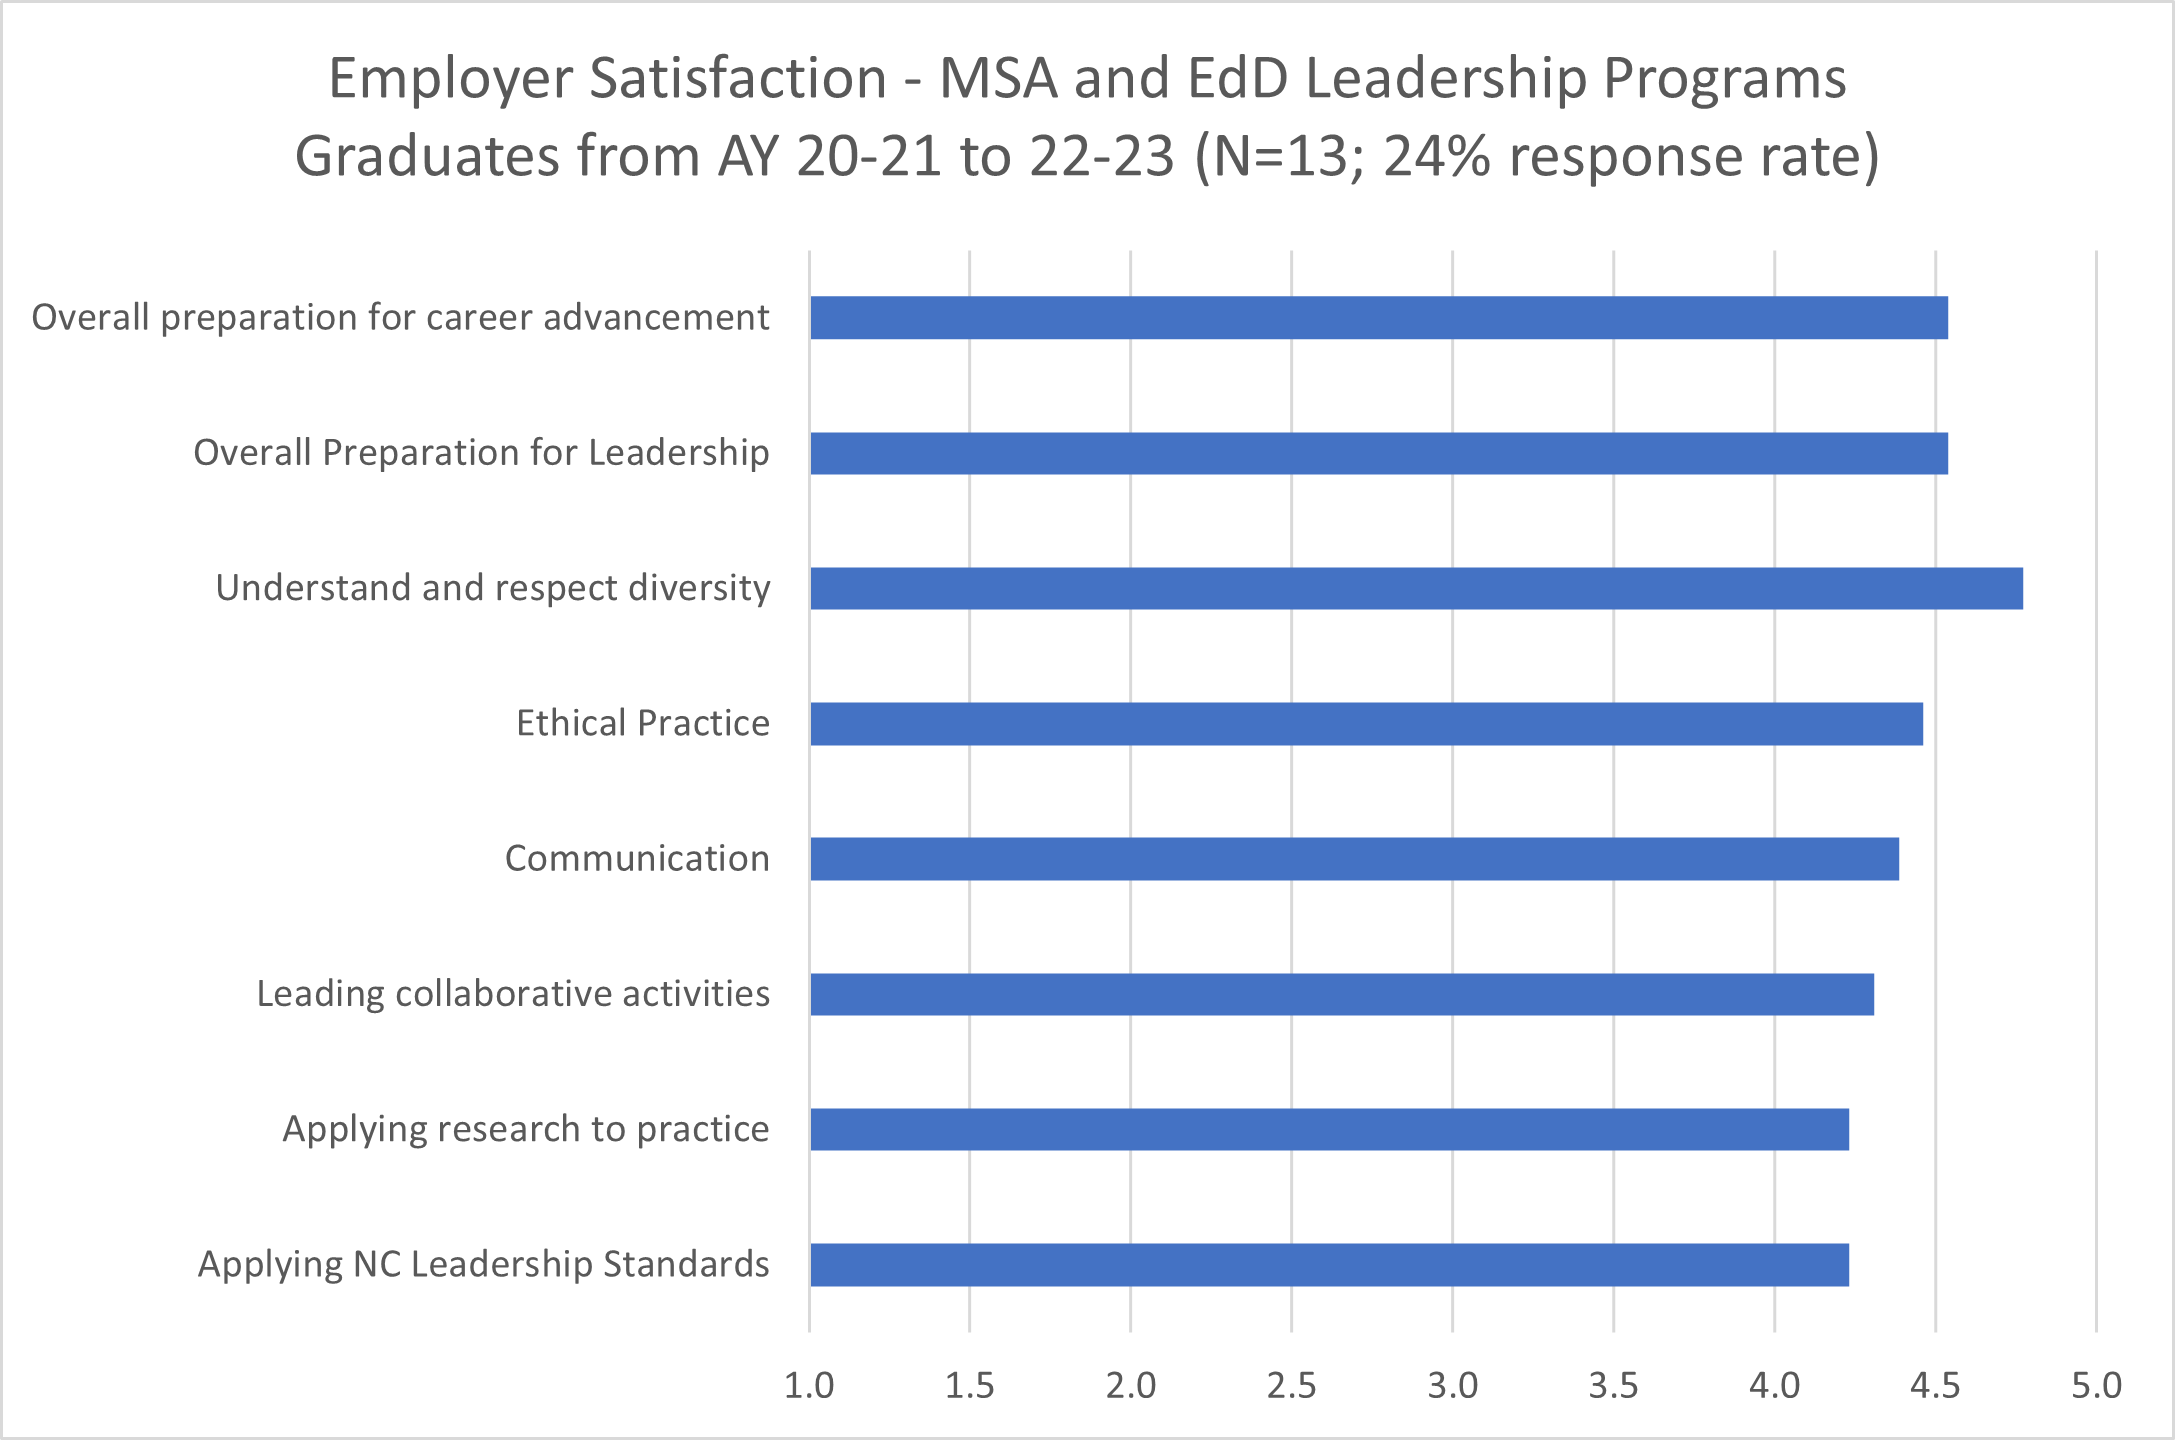 Graph showing employer satisfaction with recent MSA and EdD program graduates. Description in text.